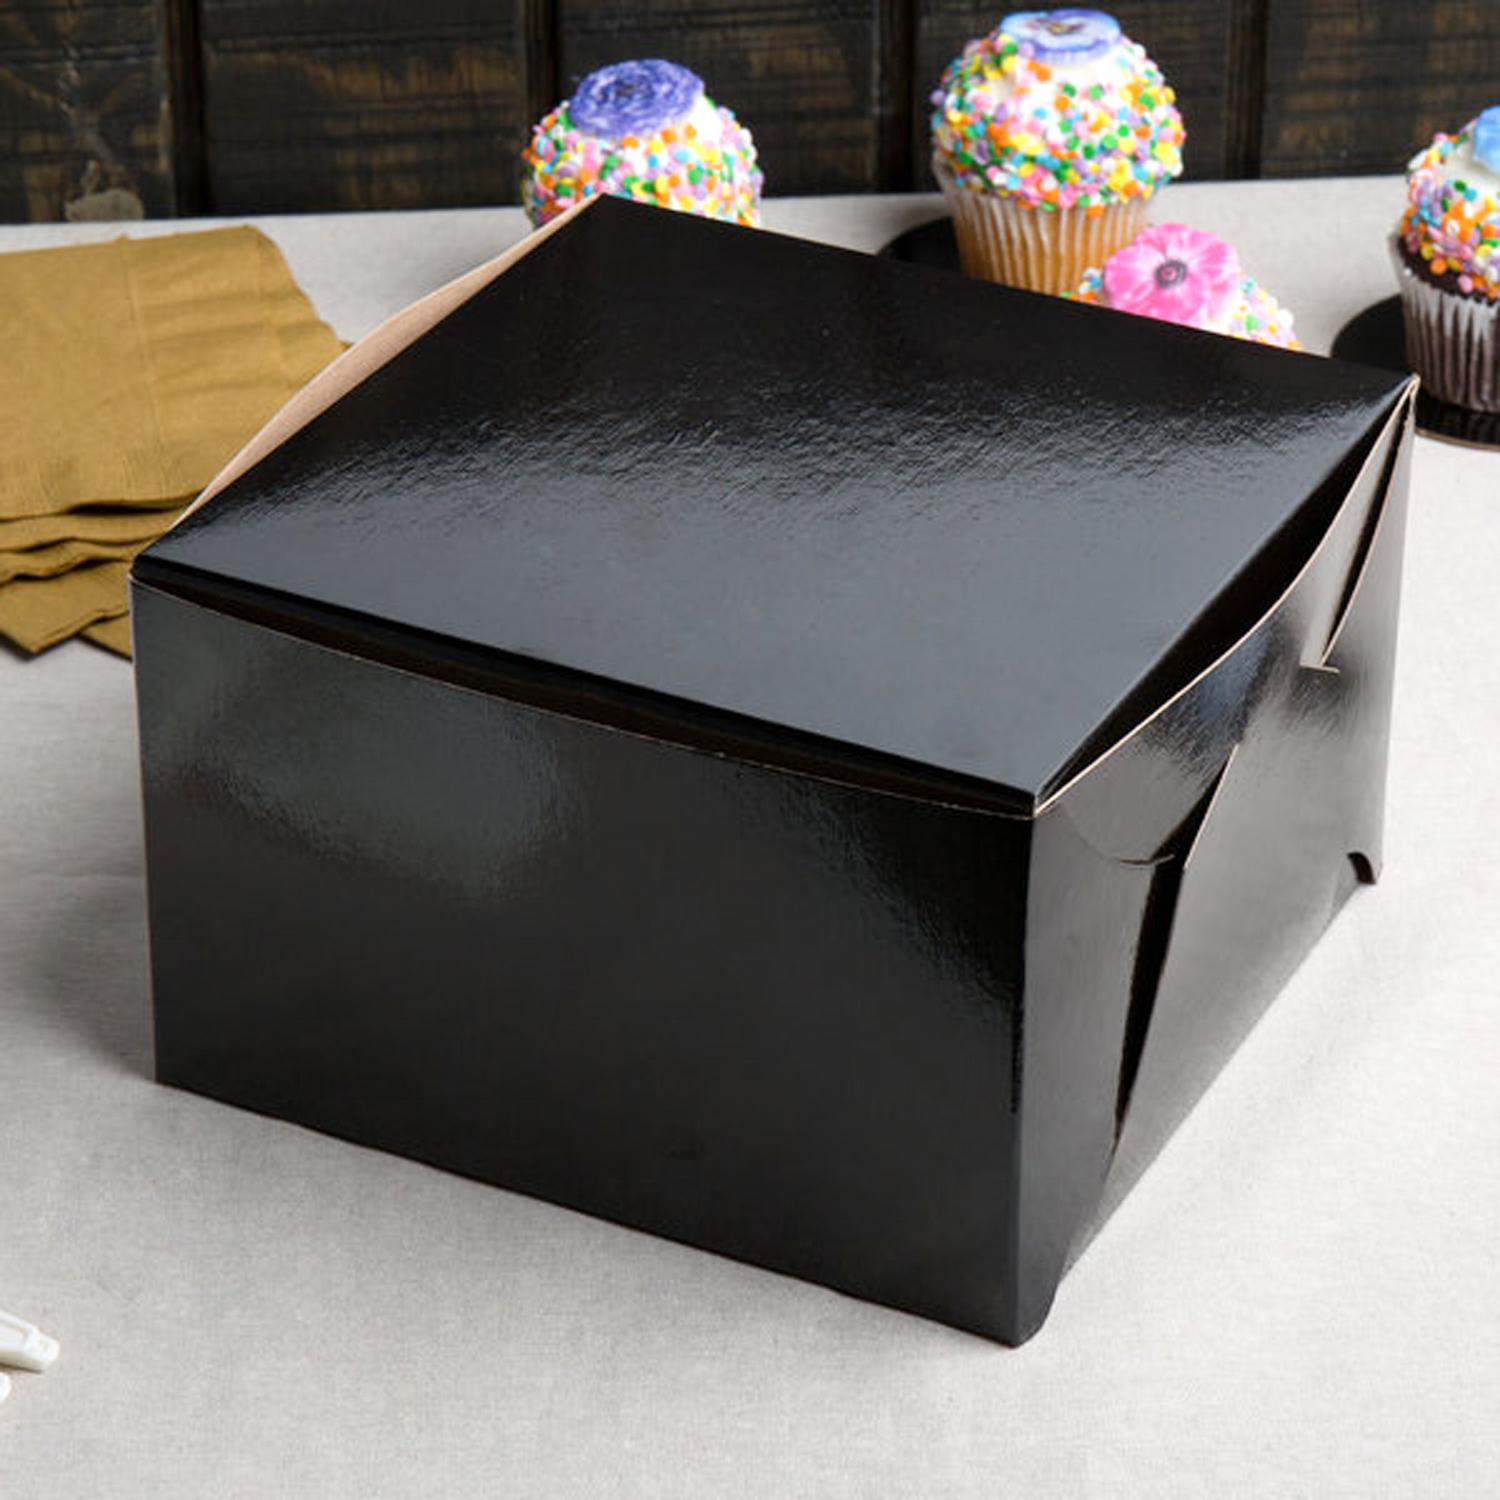 PACK OF 100 -  BLACK 12 X 12 X 4 Inches CAKE BOXES